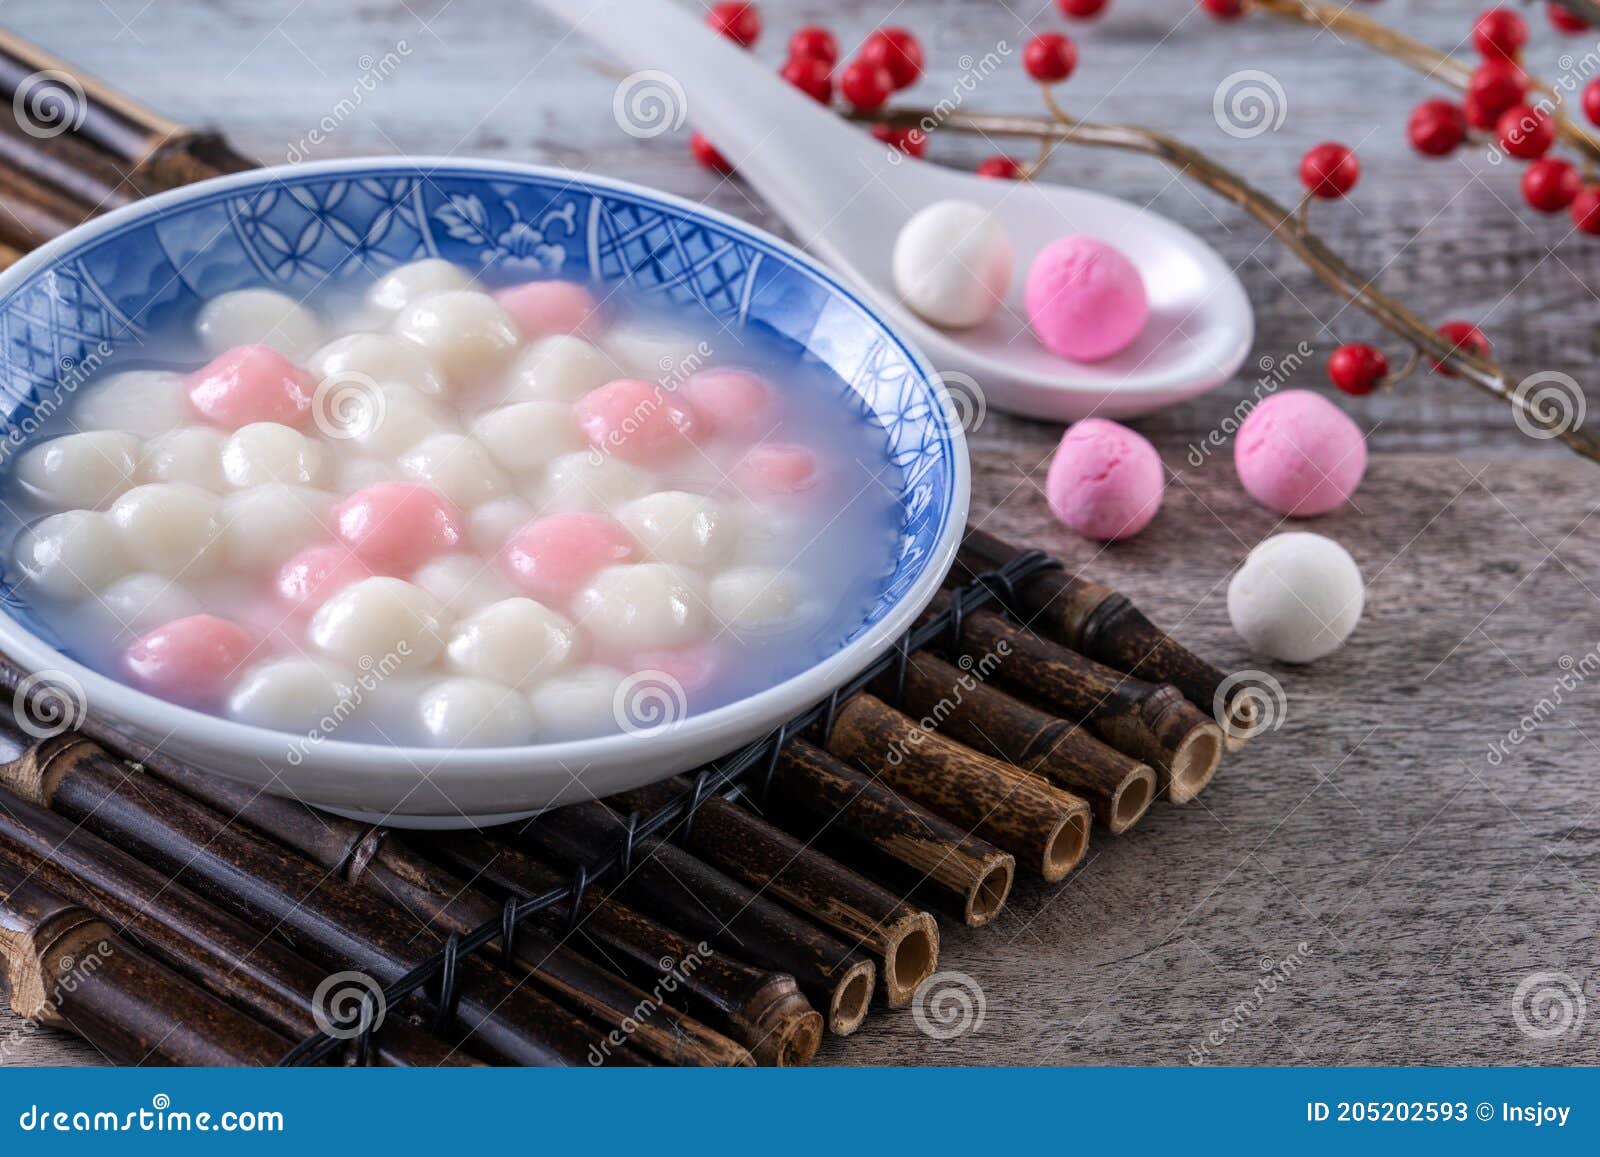 close up of red and white tangyuan in blue bowl on wooden background for winter solstice